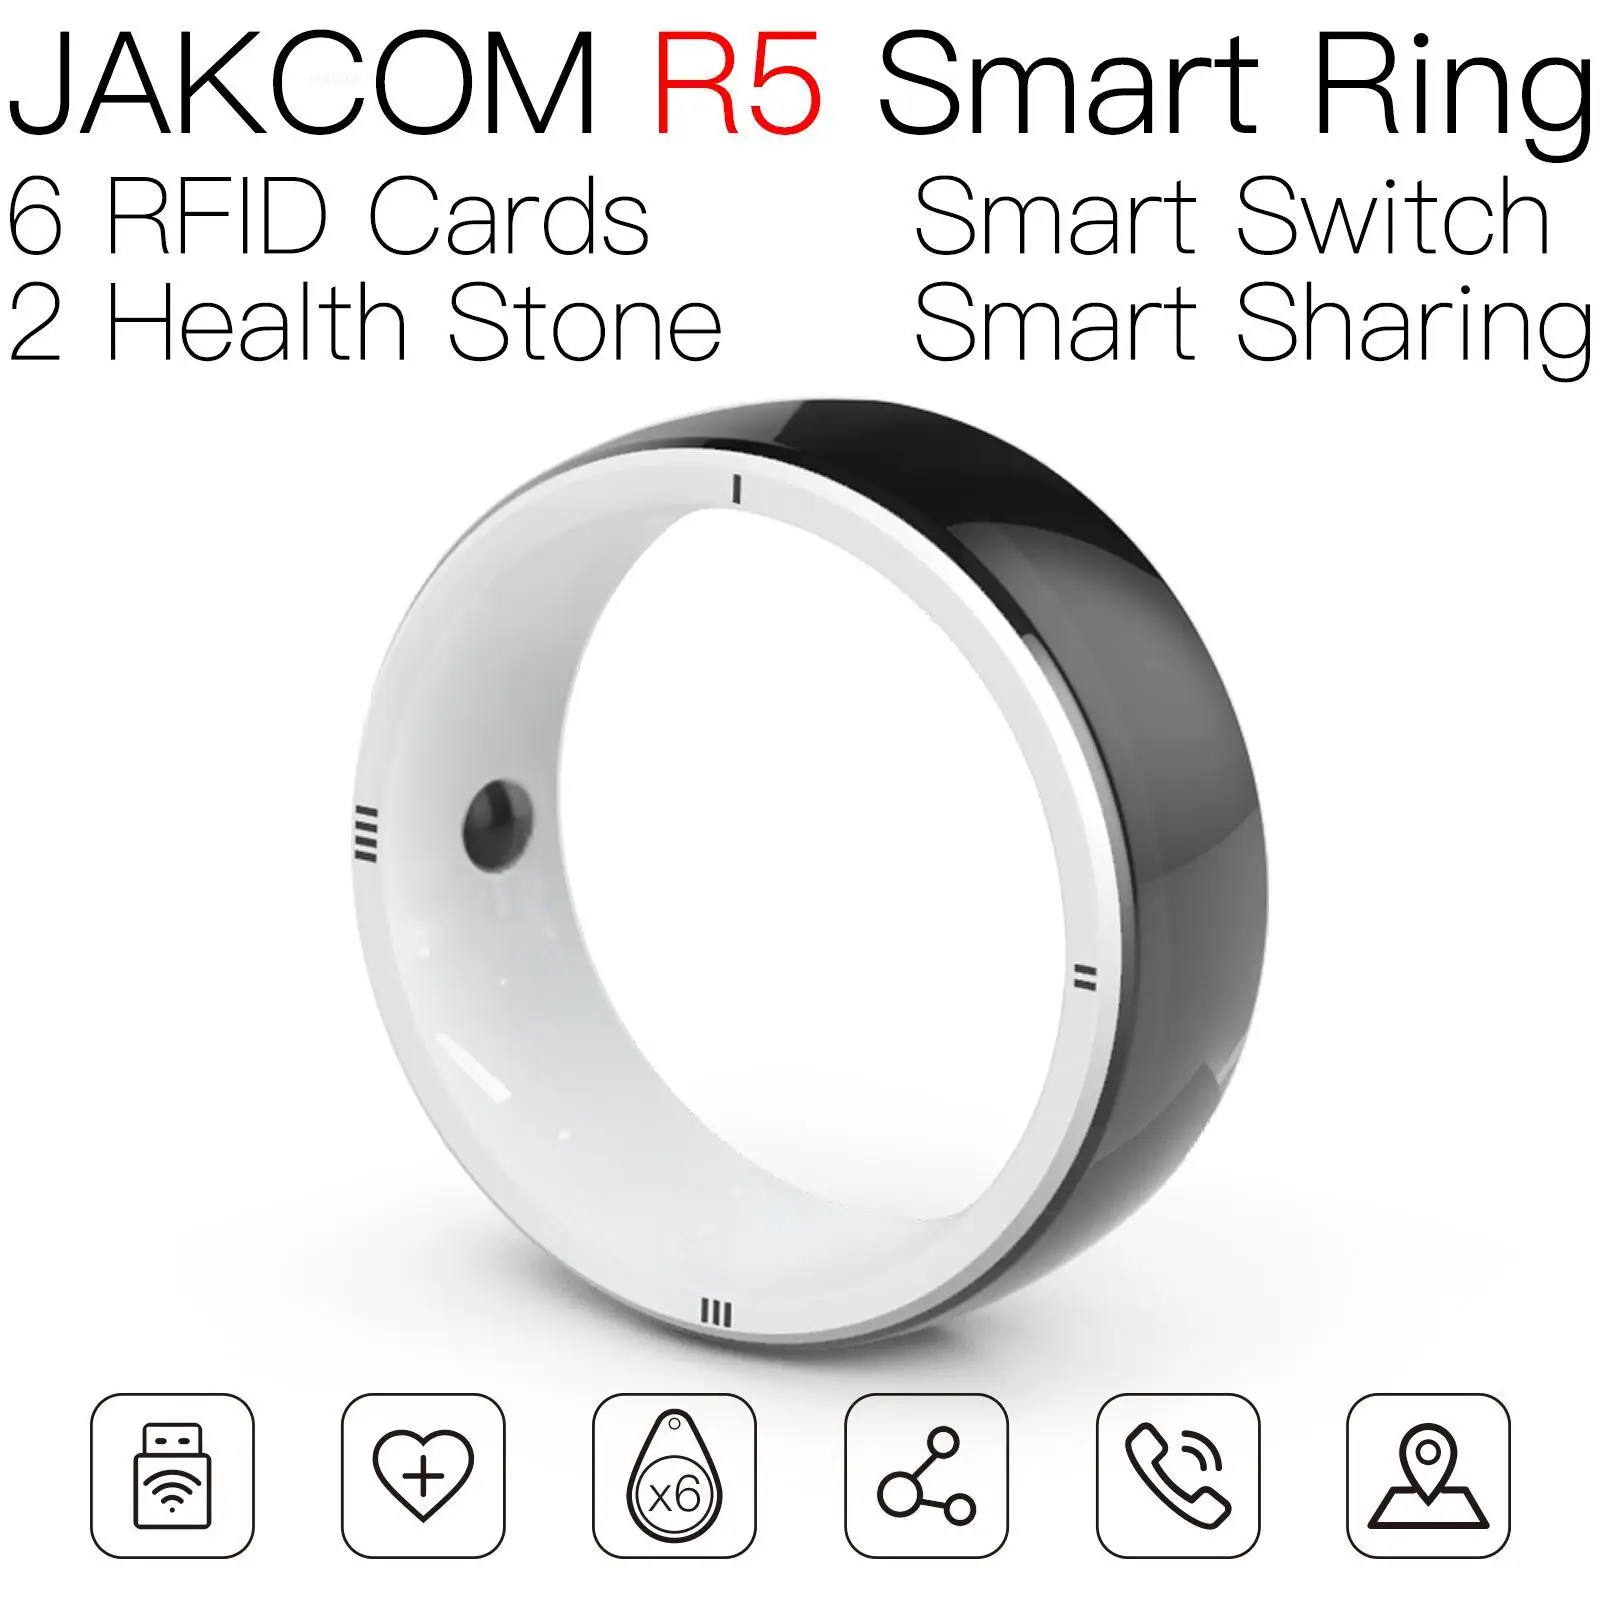 

JAKCOM R5 Smart Ring For men women rf card rewritable 12 months europe rdid tag reader dog clock in rfid band iso18000